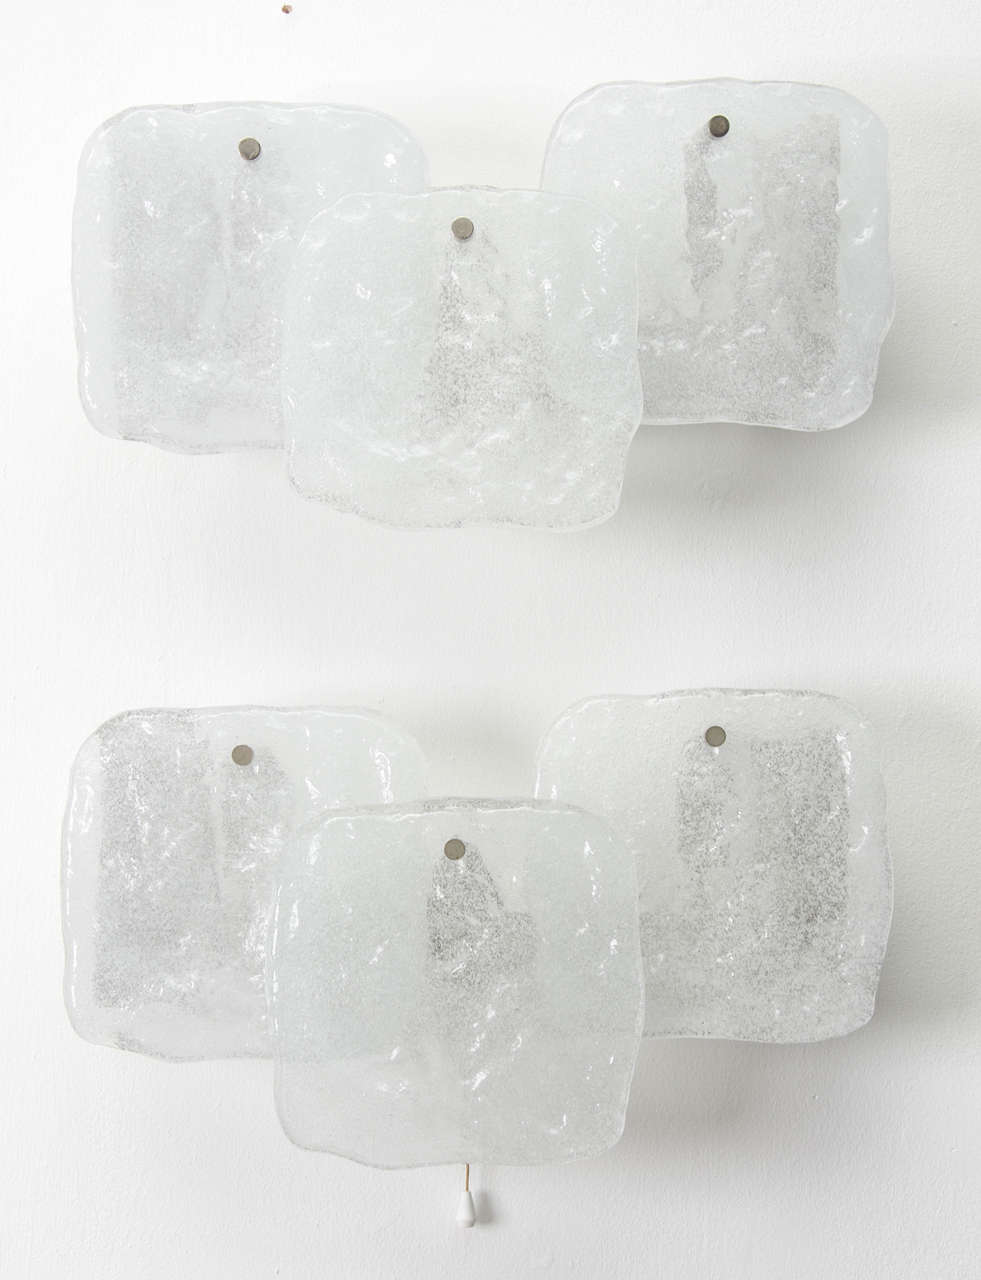 Pair of ice glass panel sconces by Kalmar of Austria. 

Each sconce has three glass panels which hang from metal wall-mounted chrome frames; they are in excellent original condition. Measures: Glass panels are approximately 17 cm x 17 cm.

Two